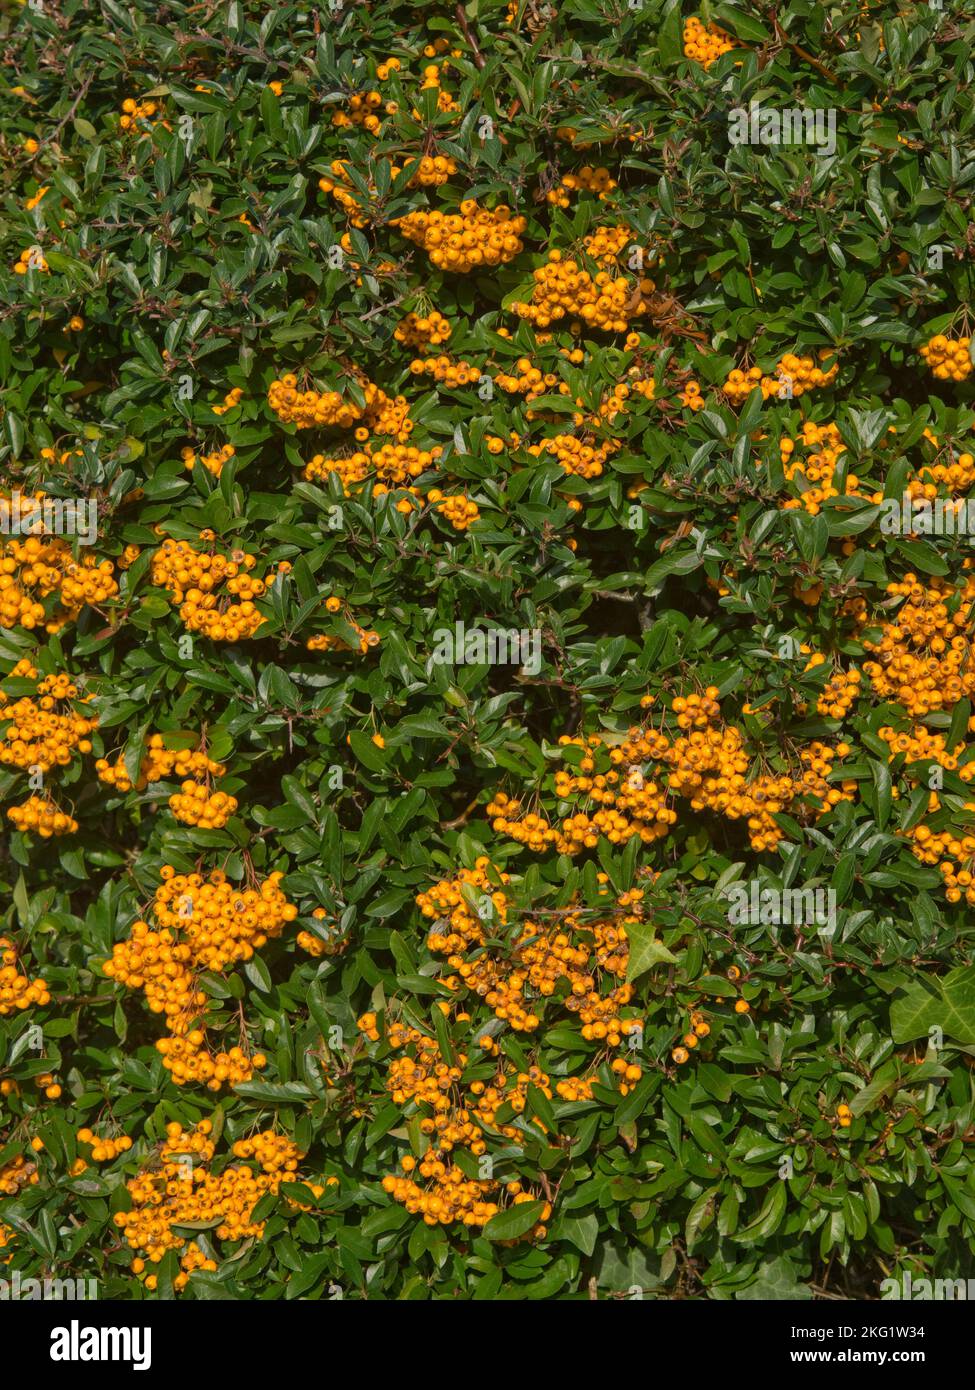 Attractive and profuse yellow-orange ripe berry like pomes of thorny firethorn (Pyracantha spp.) bush in early autumn garden, Berkshire September Stock Photo